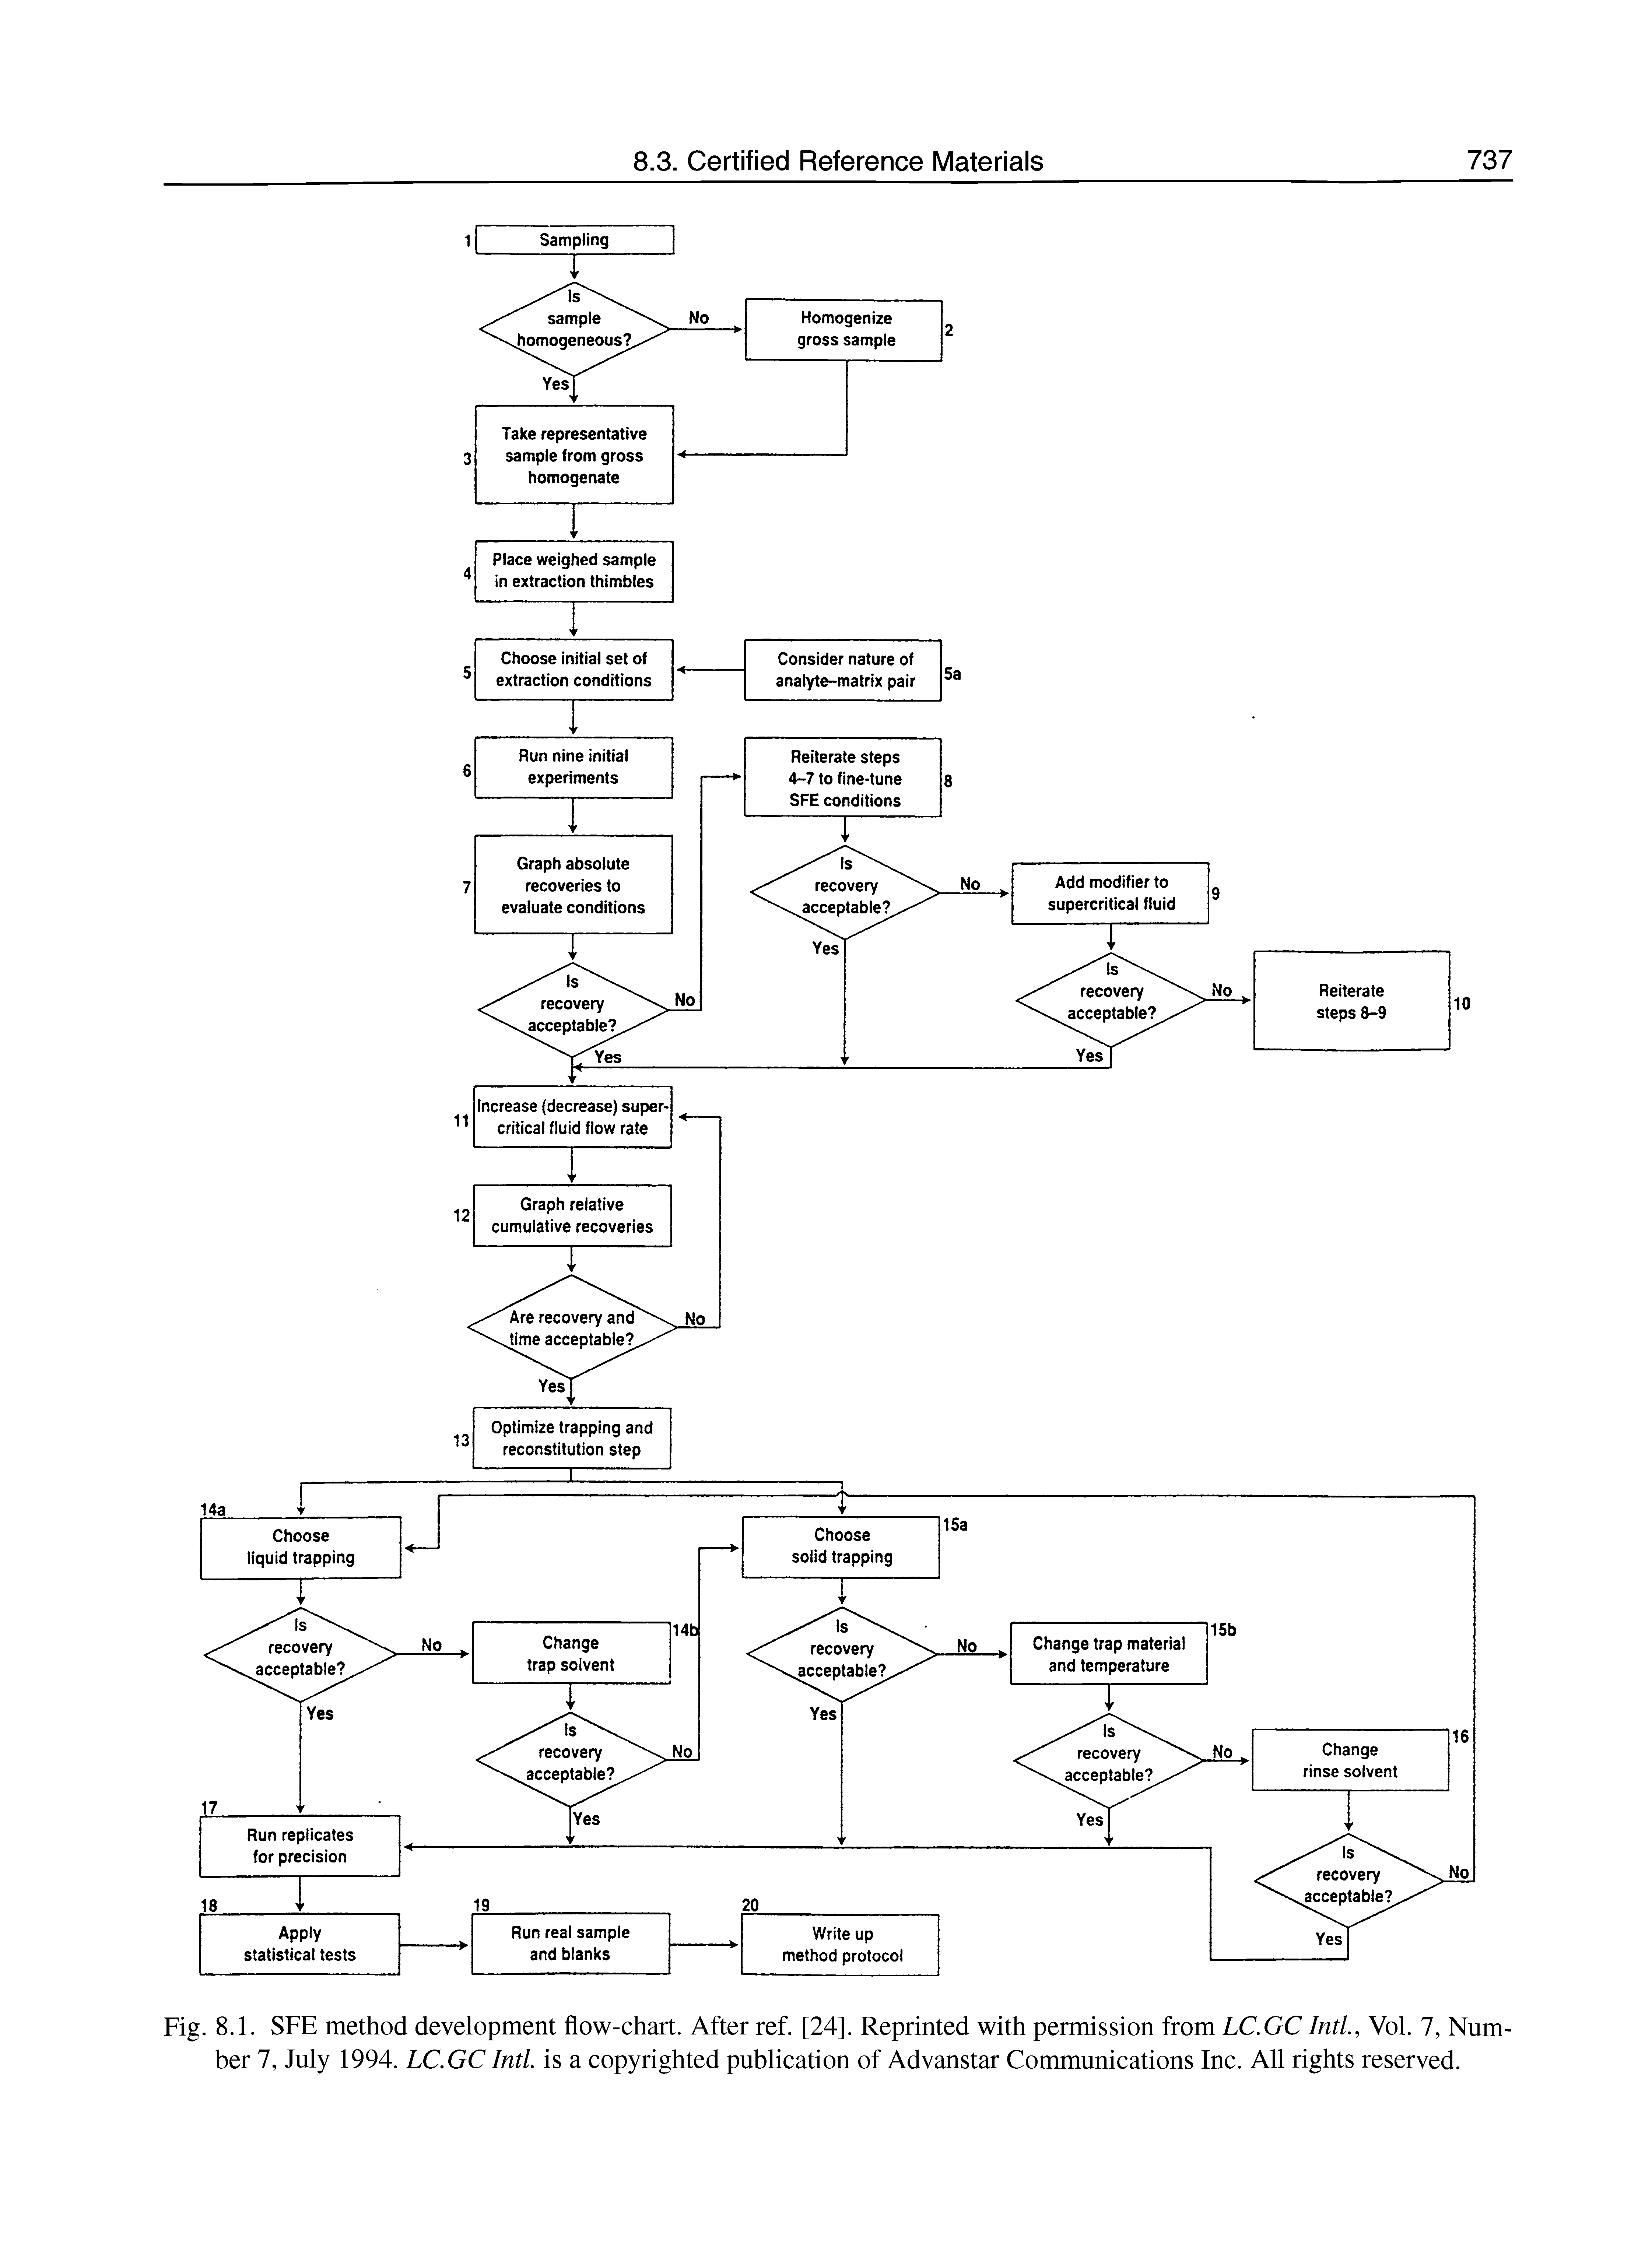 Fig. 8.1. SFE method development flow-chart. After ref. [24]. Reprinted with permission from LC.GC Inti, Vol. 7, Number 7, July 1994. LC.GC Inti, is a copyrighted publication of Advanstar Communications Inc. All rights reserved.